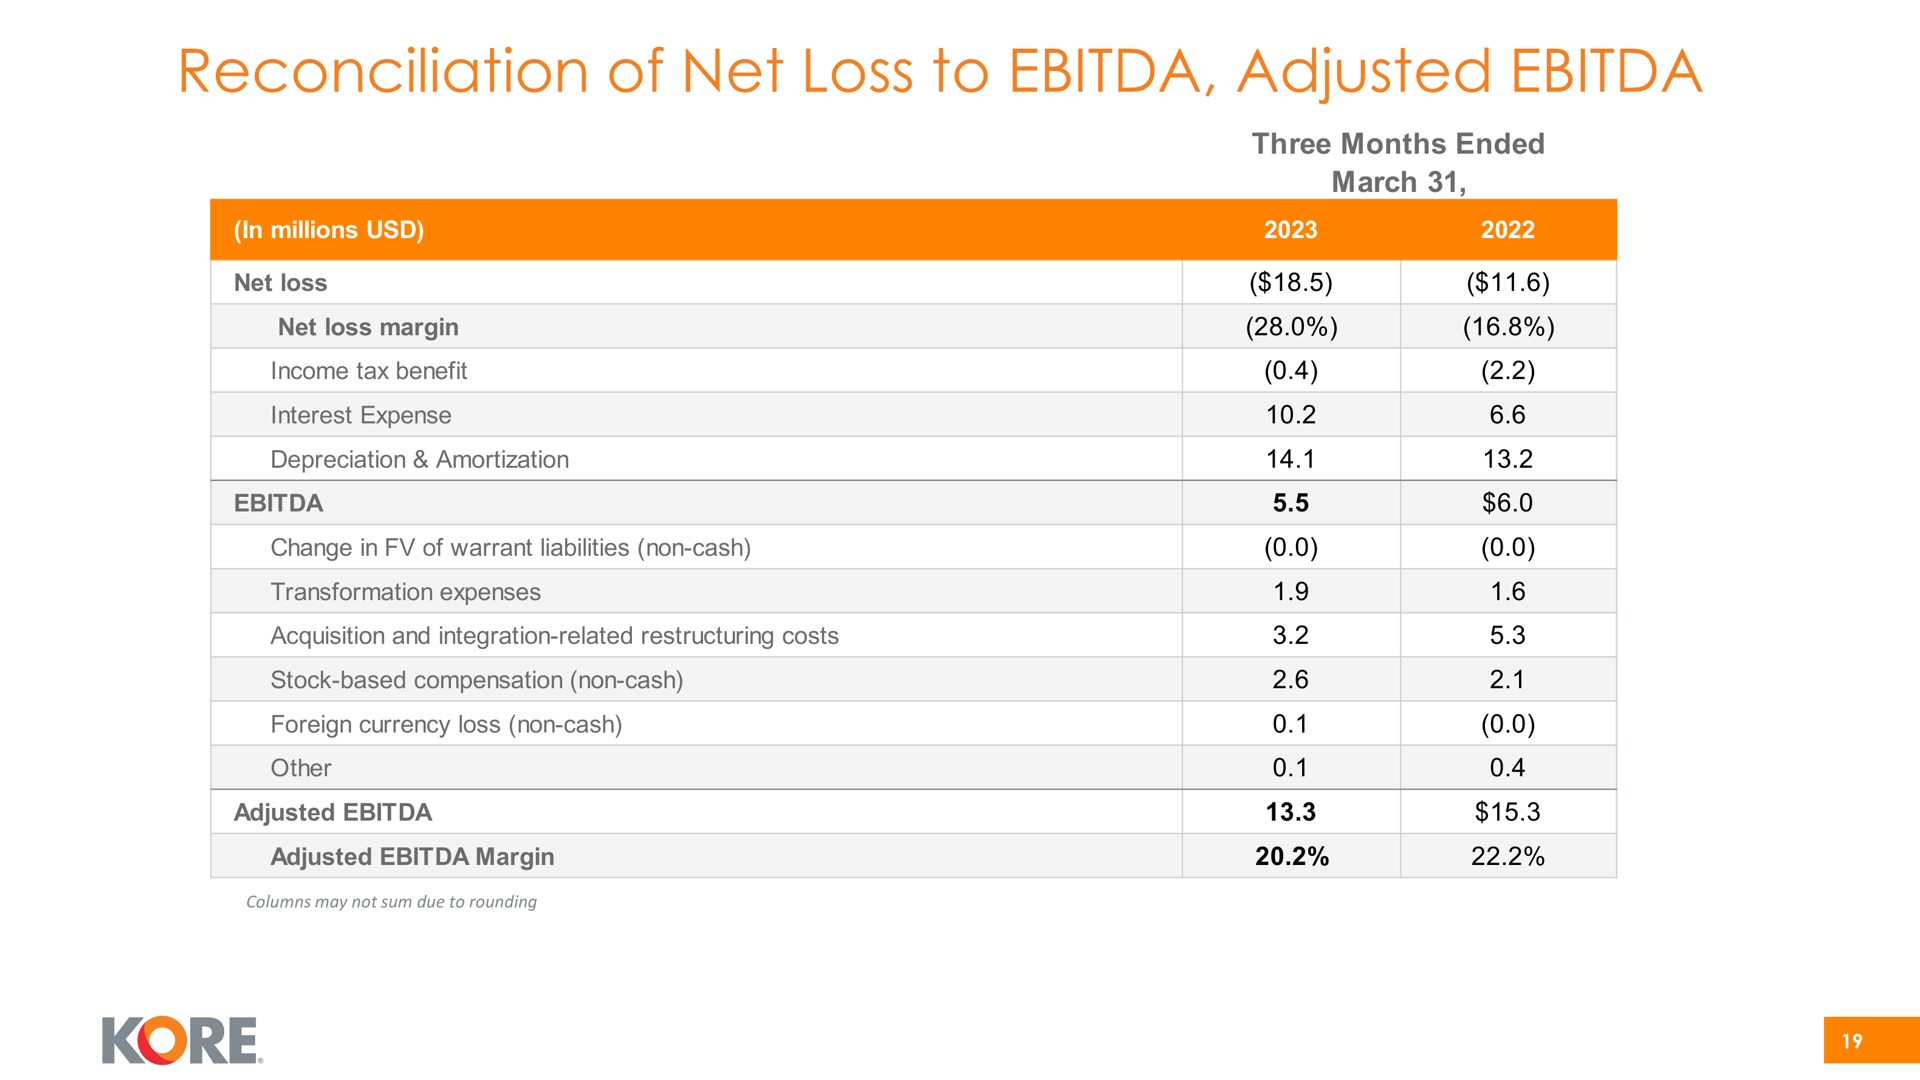 reconciliation of net loss to adjusted kore | Kore